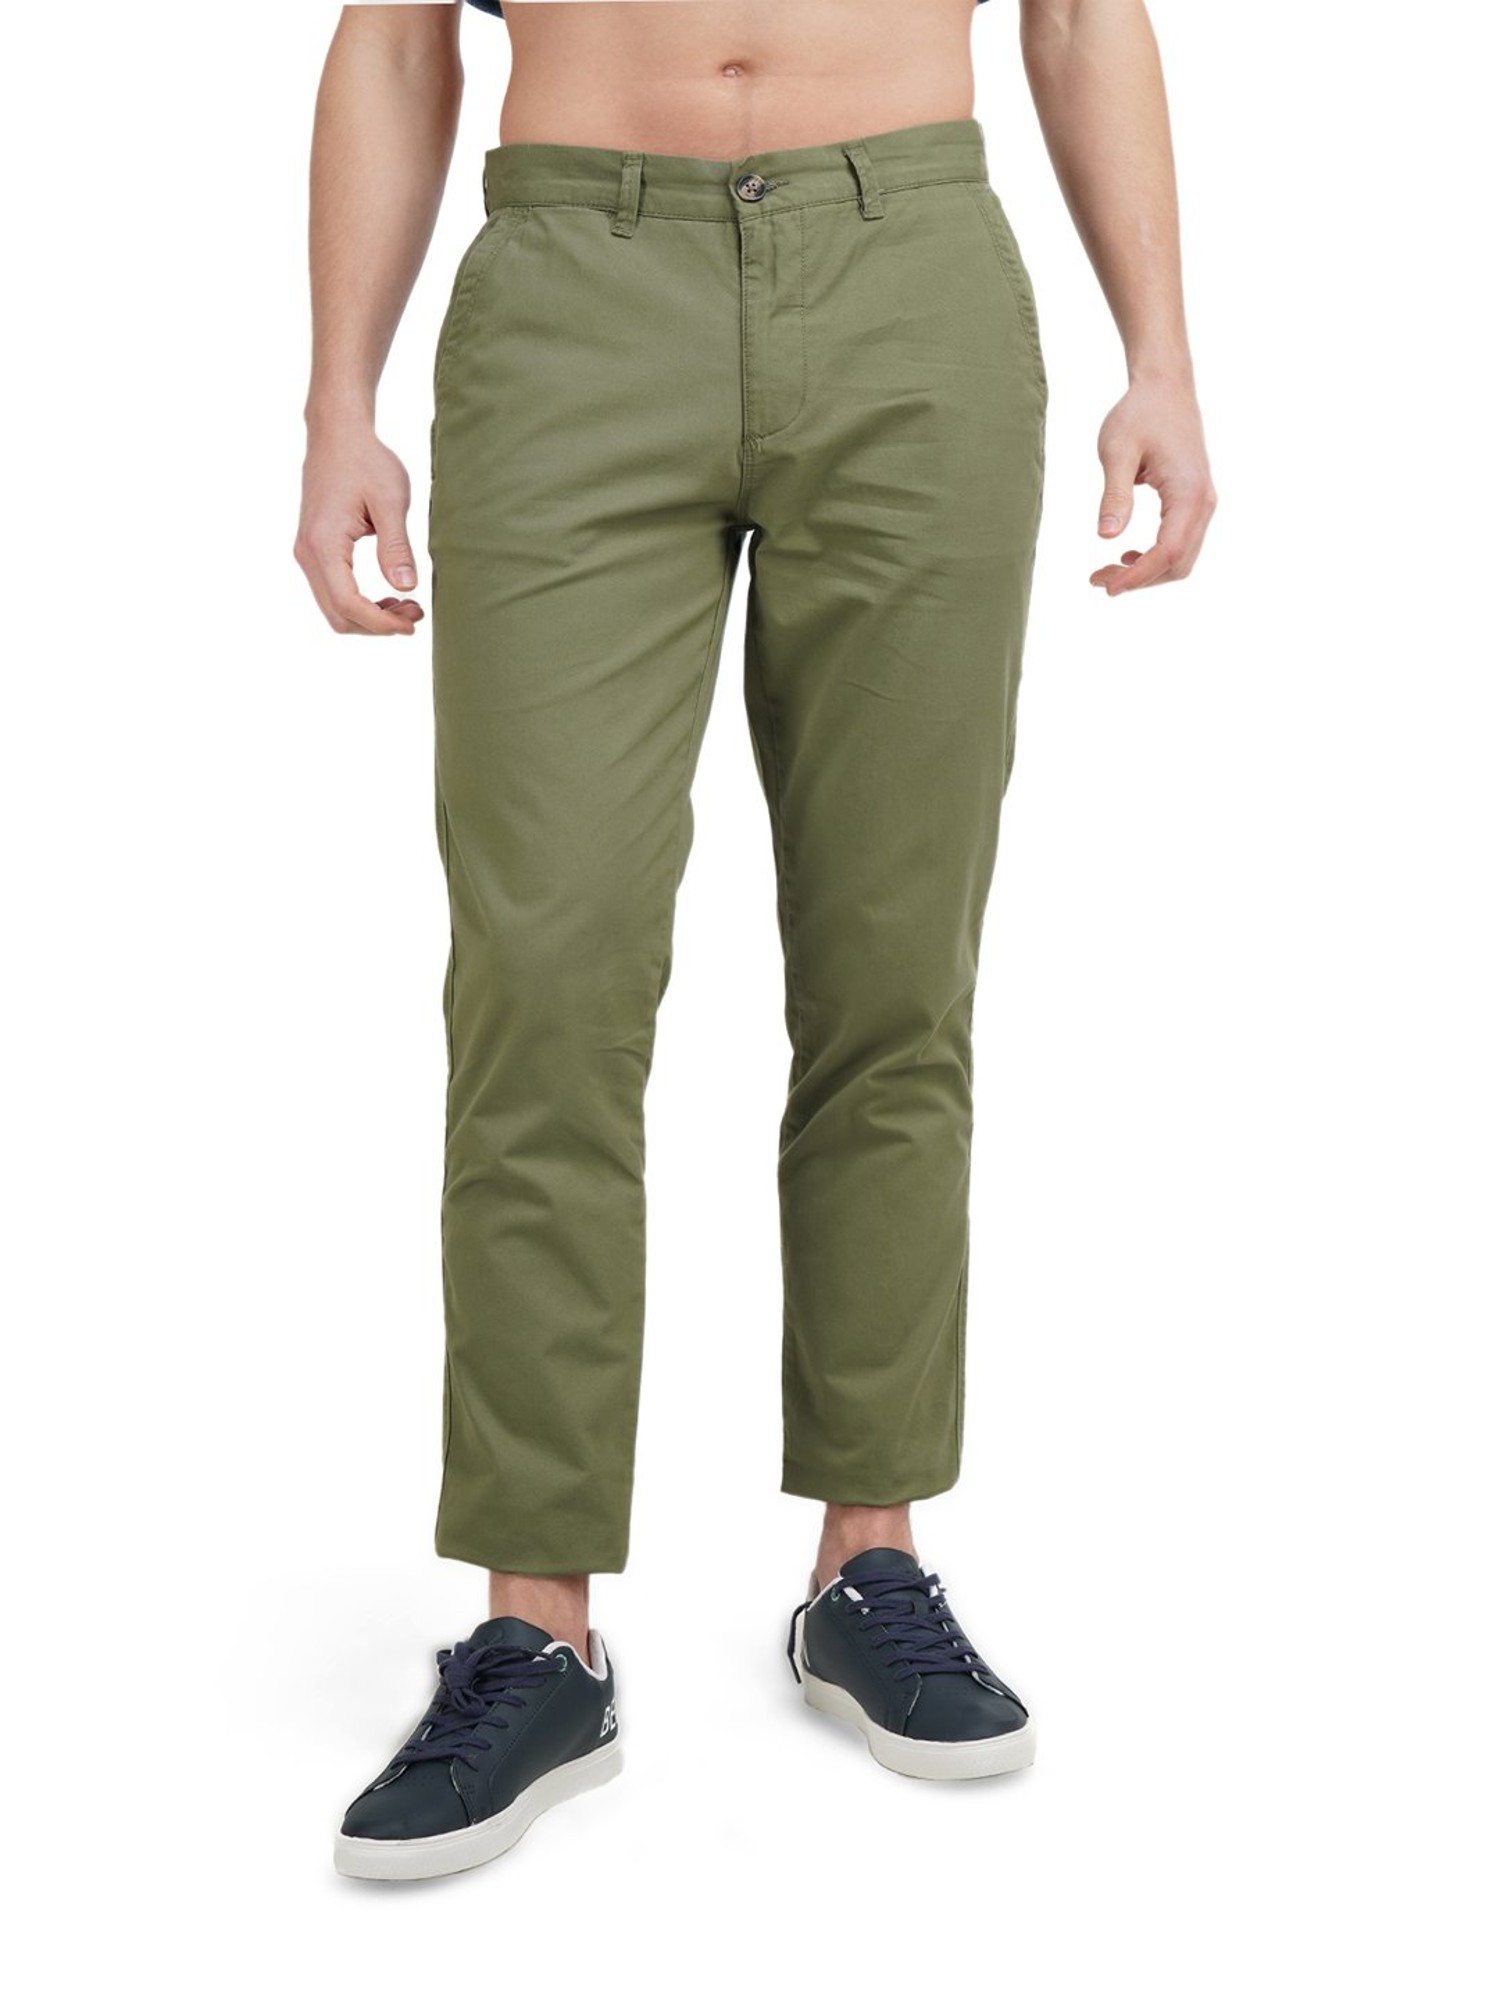 Green trousers | Olive Green Glow | Official website | POM Amsterdam